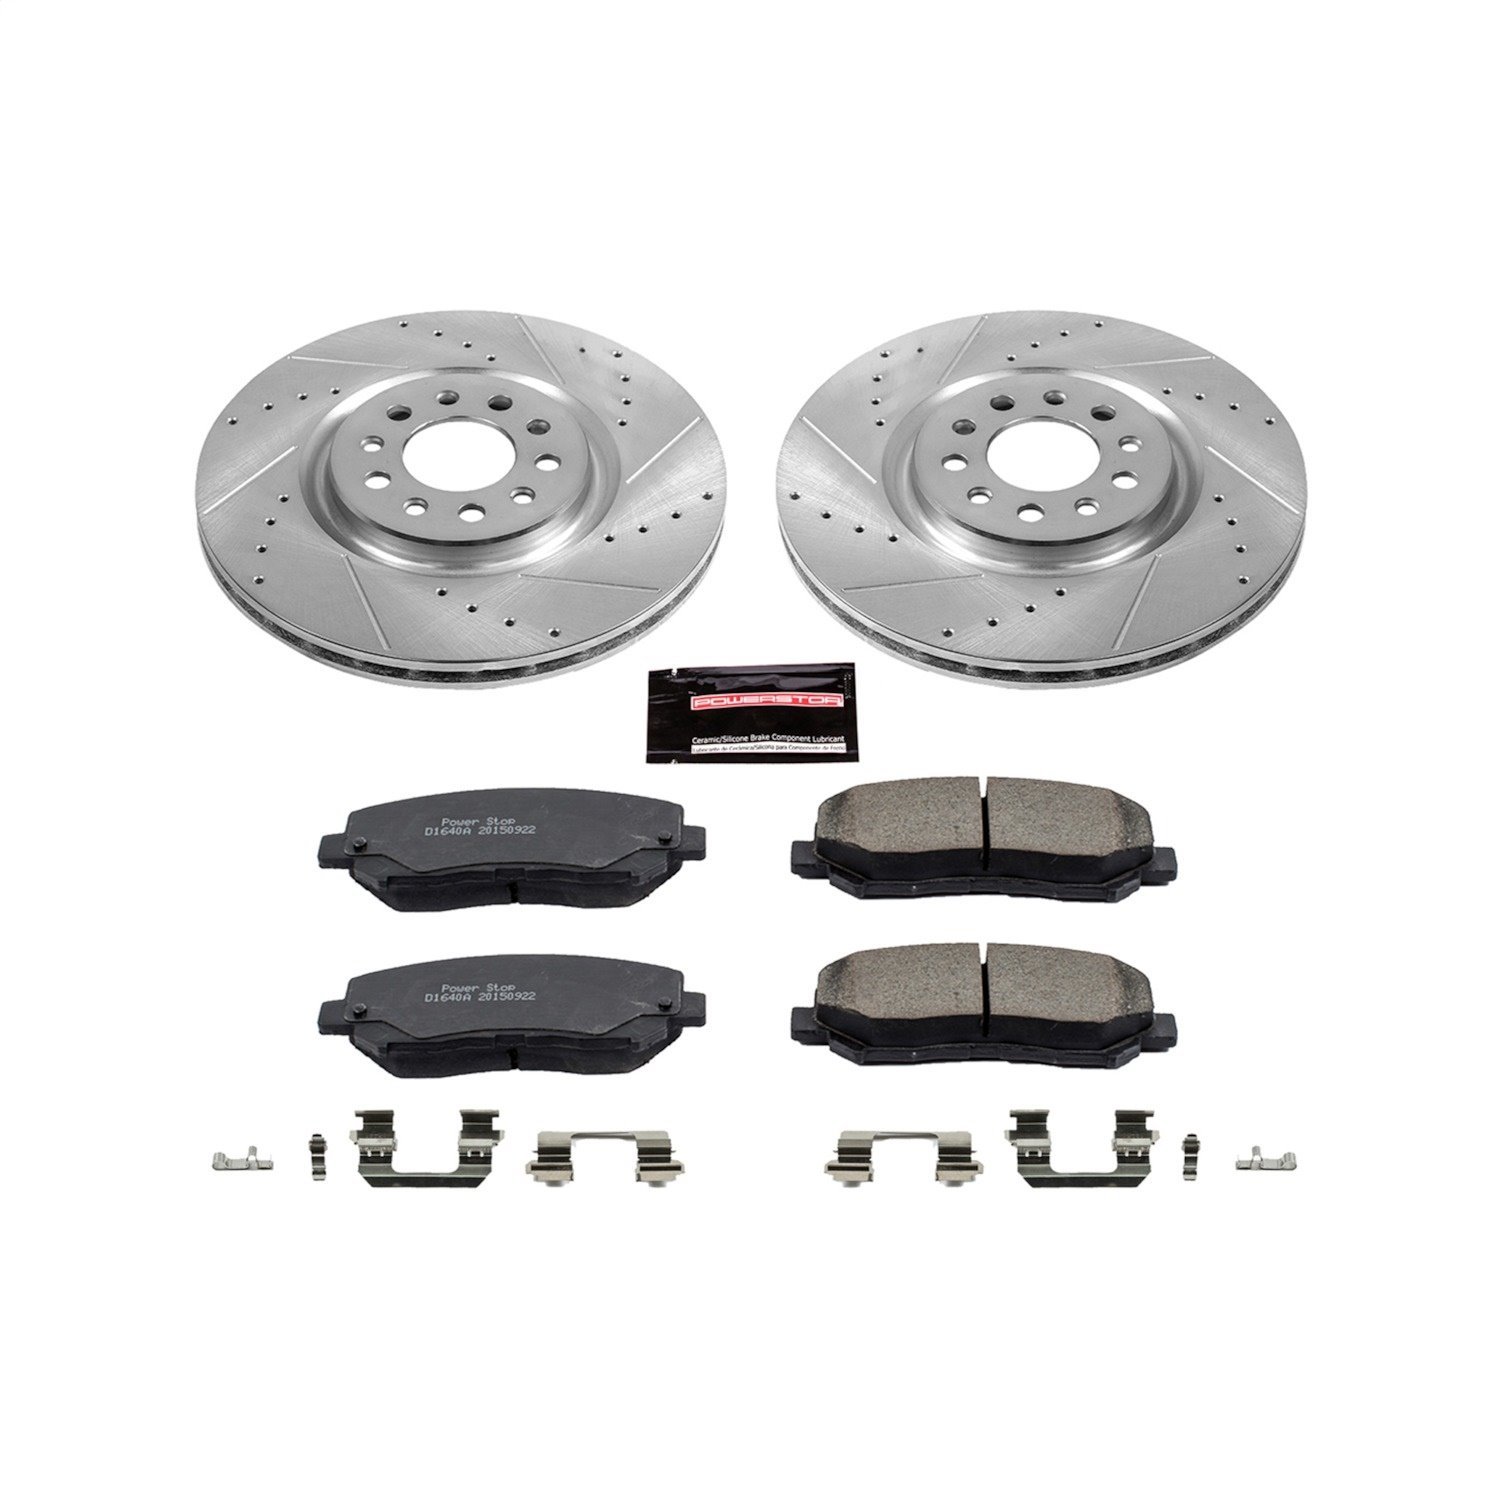 Z23 Front Brake Pads and Rotor Kit Fits Select 2014-2021 Chrysler, Jeep Models